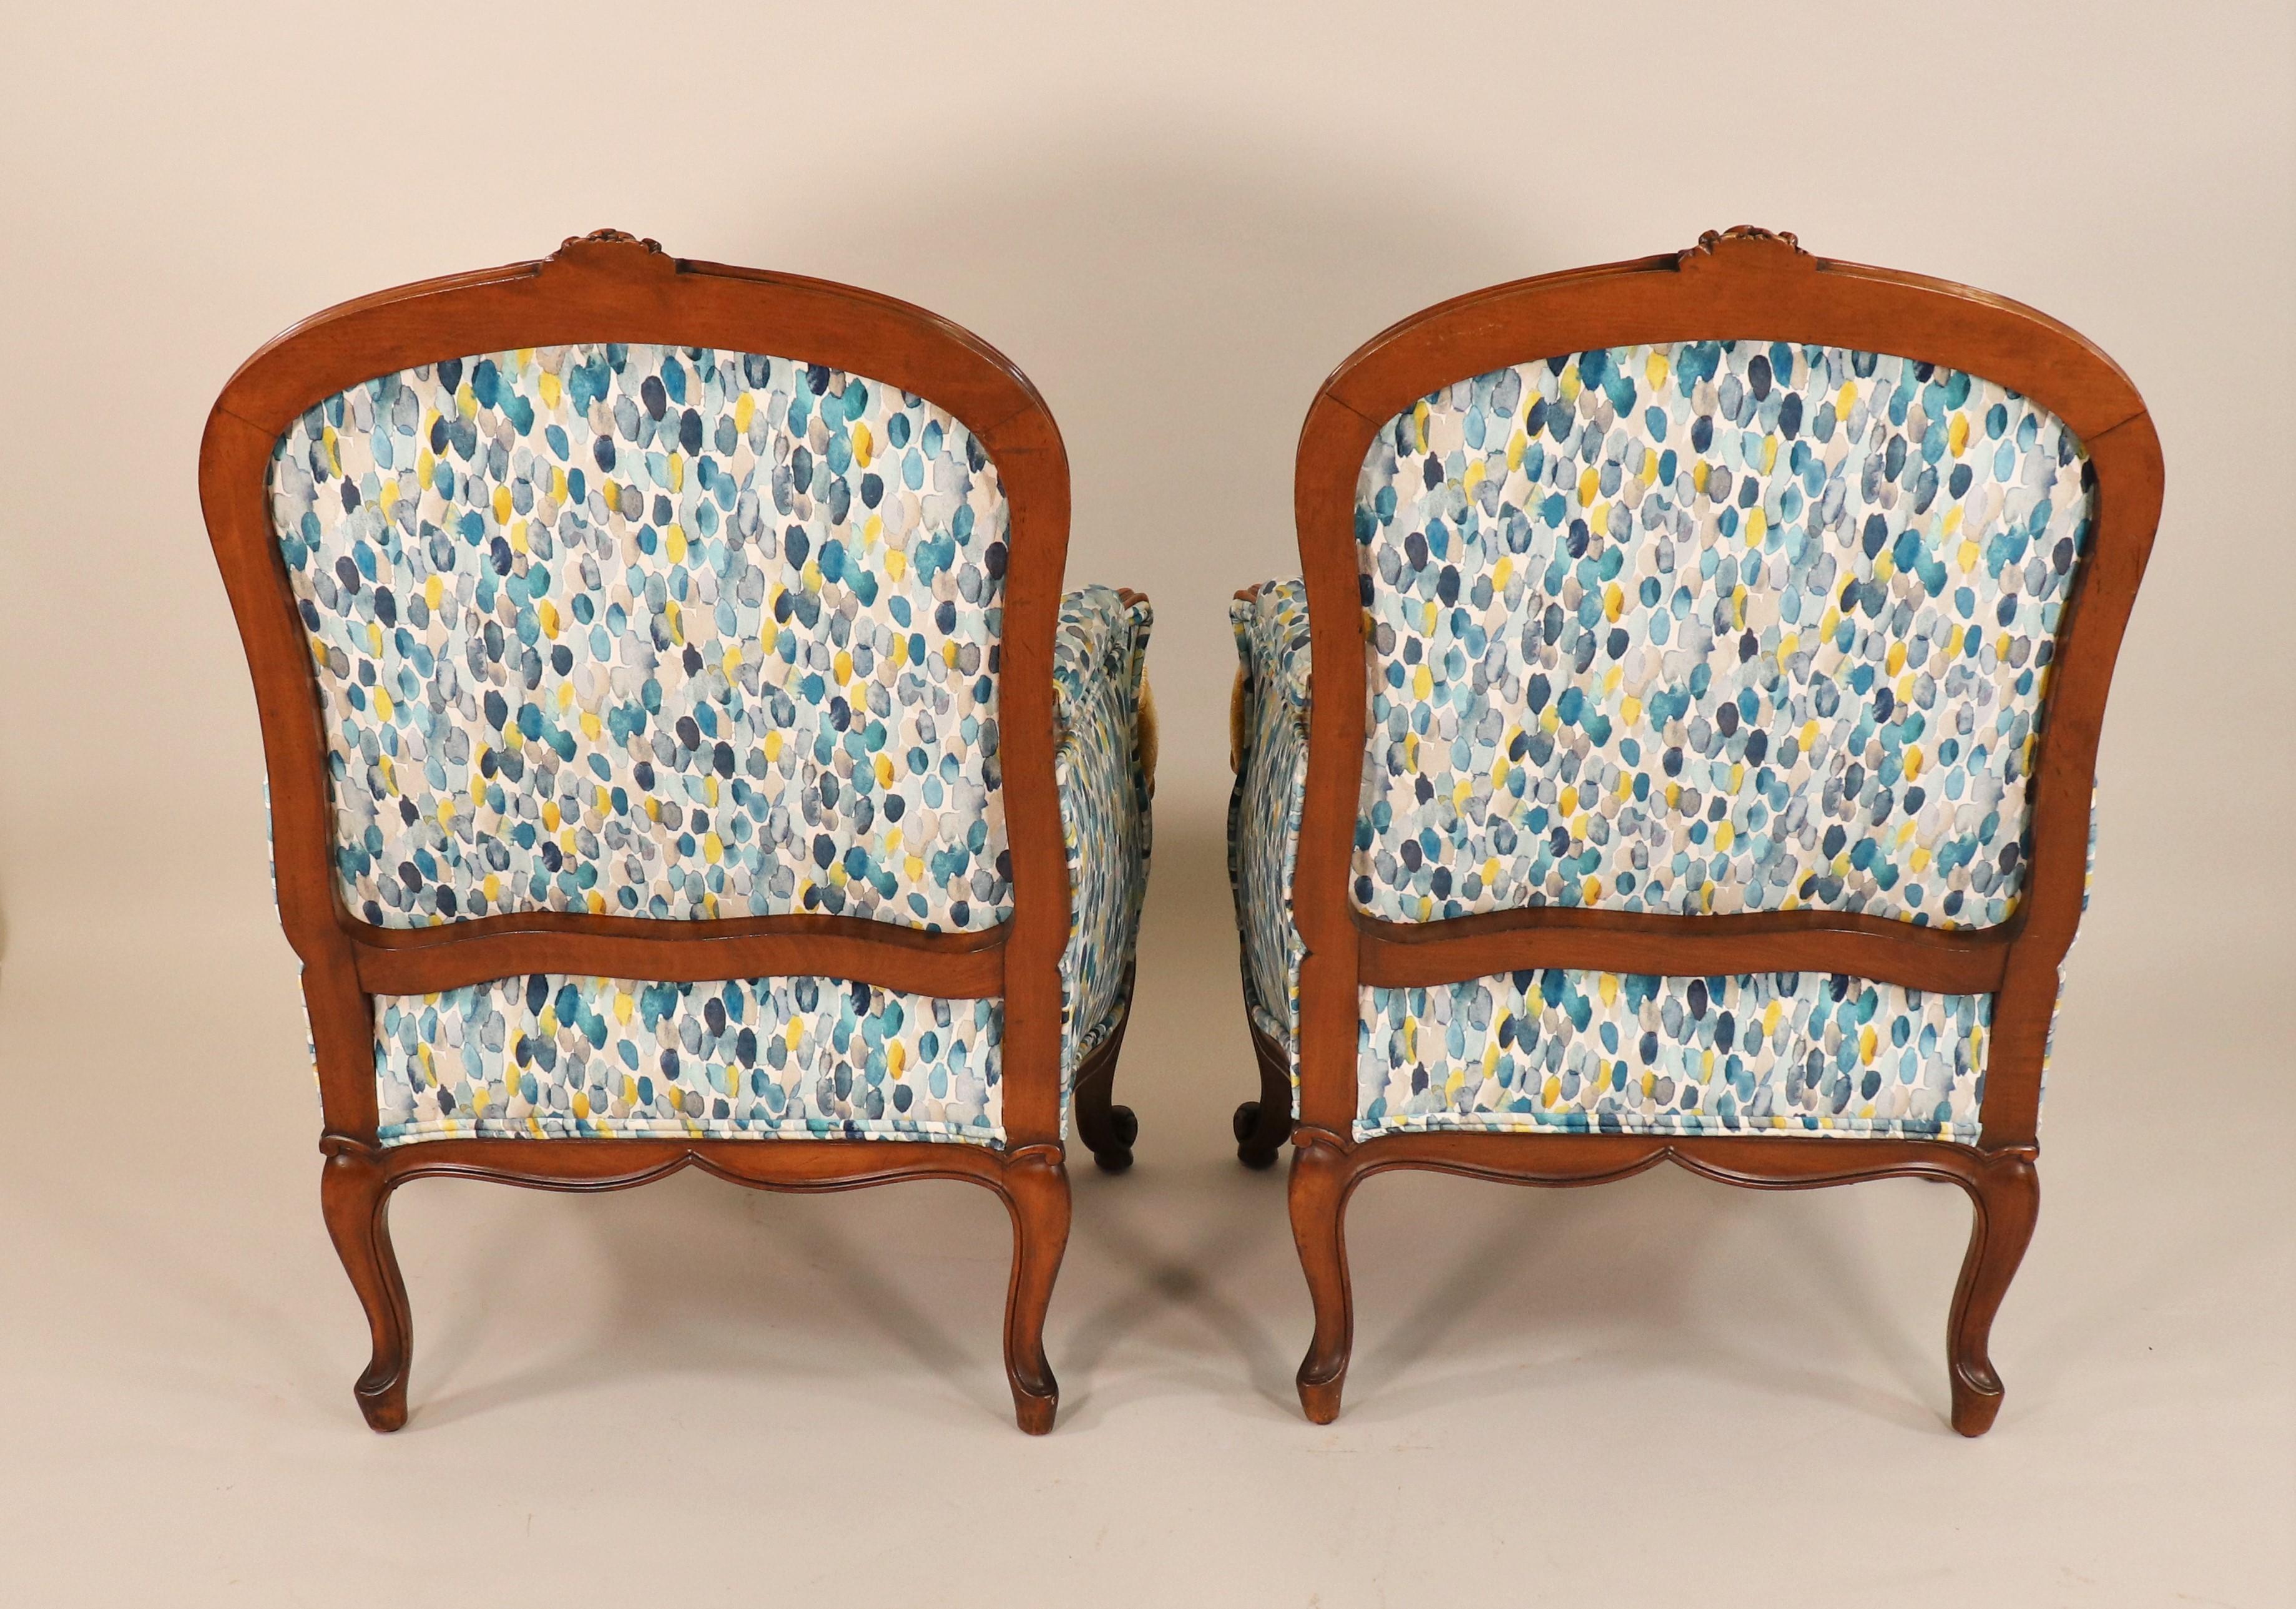 Pair of Mid-19th Century Louis XV Style Bergère Armchairs with Modern Fabrics In Good Condition For Sale In Chicago, IL